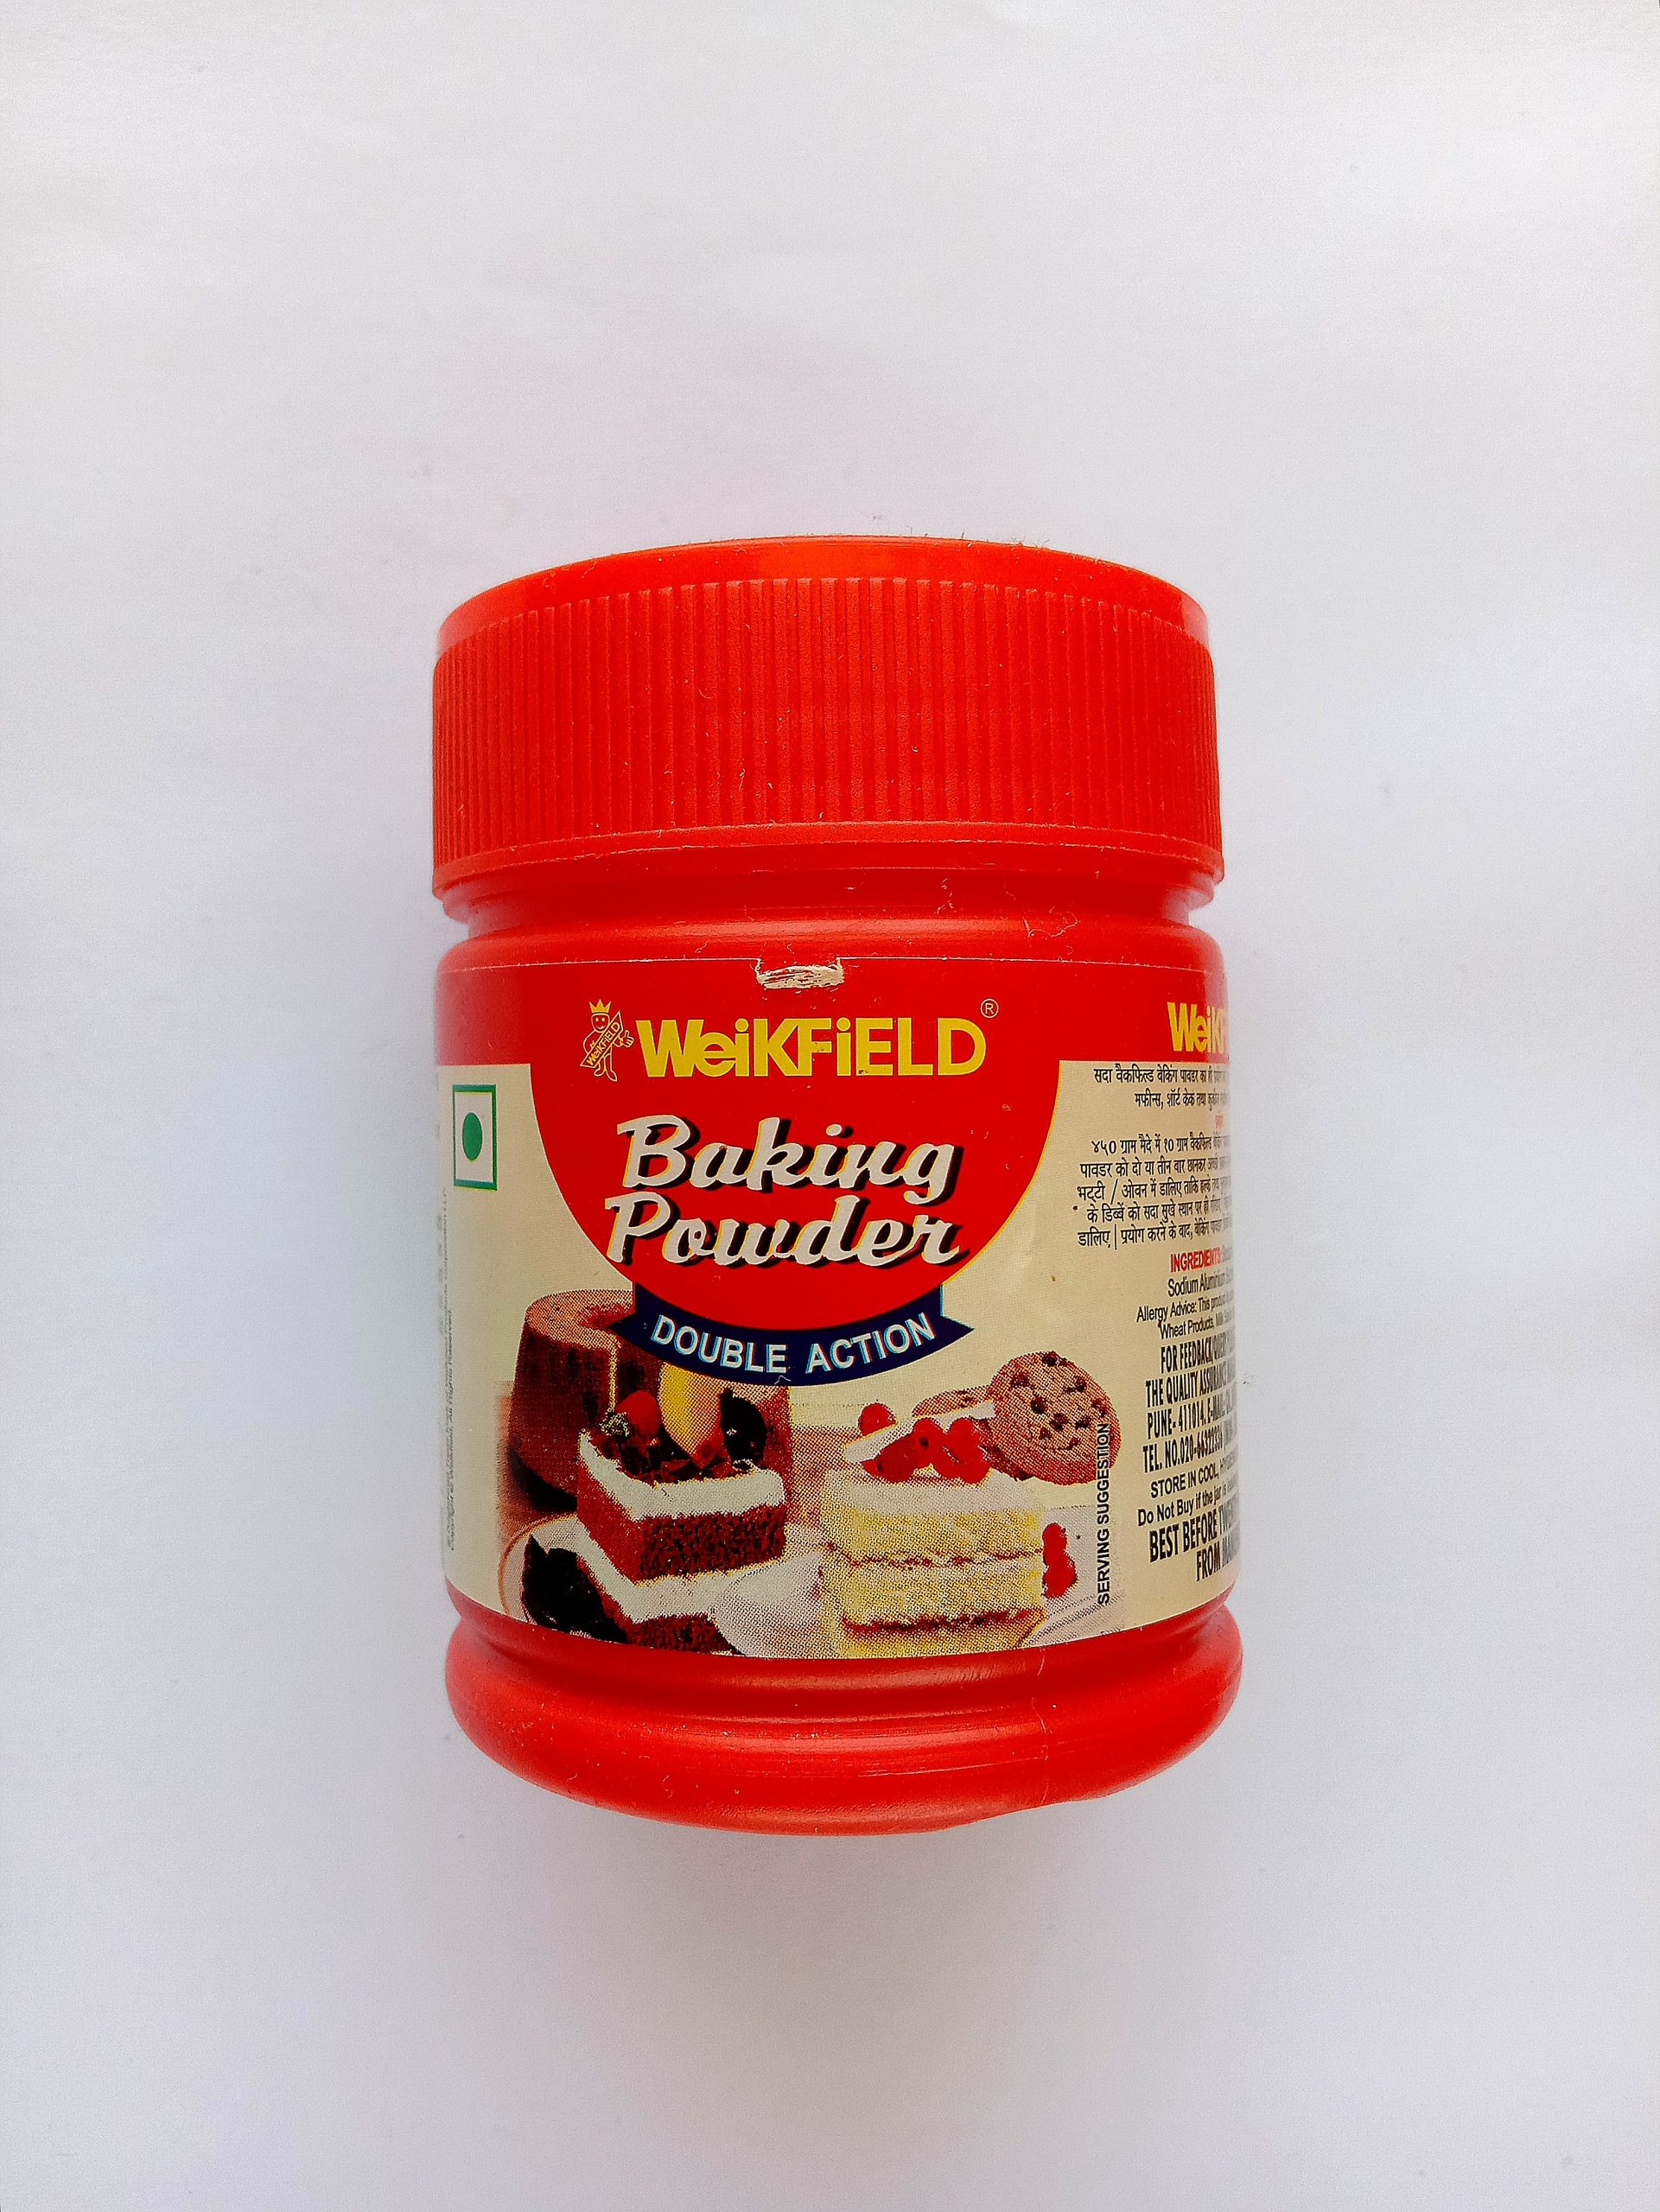 A baking powder container